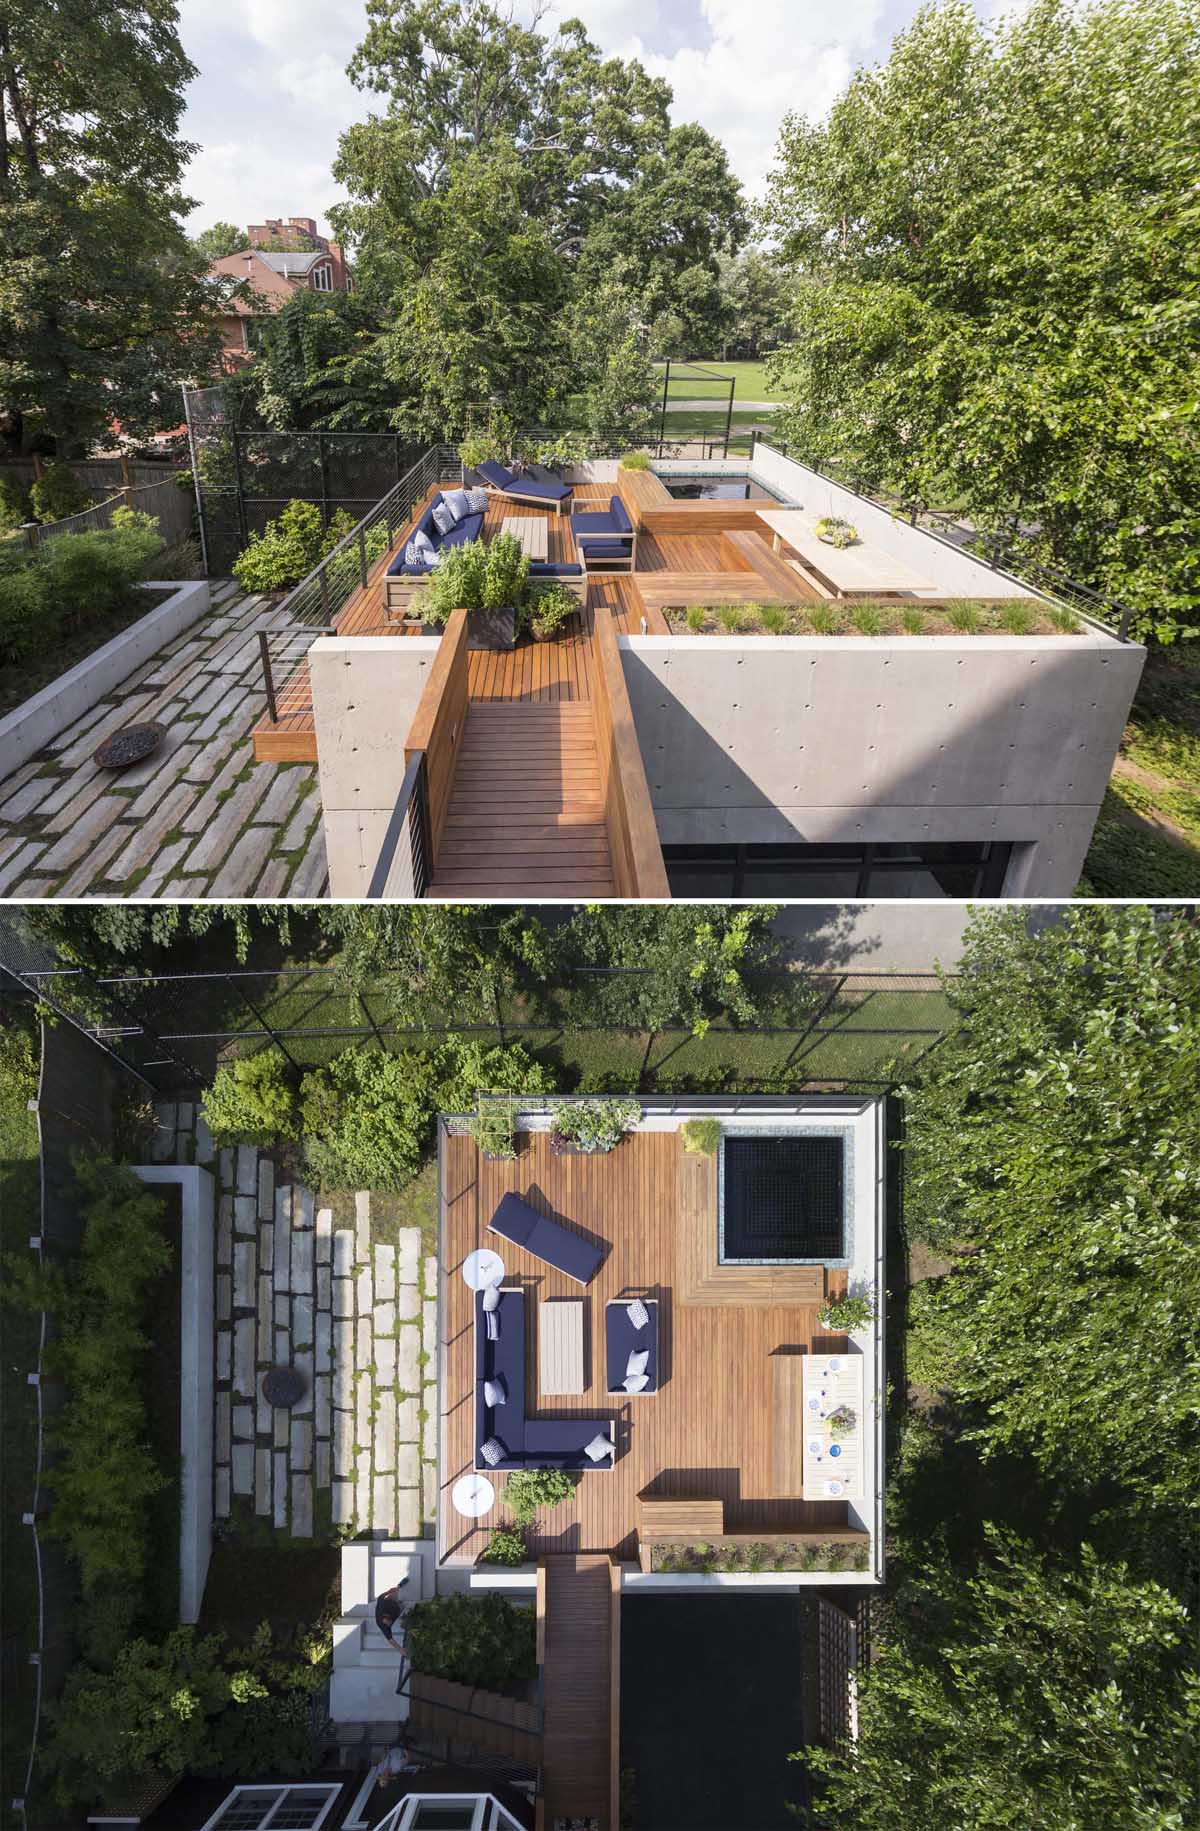 This Garage Was With A Rooftop Deck That Includes A Hot Tub